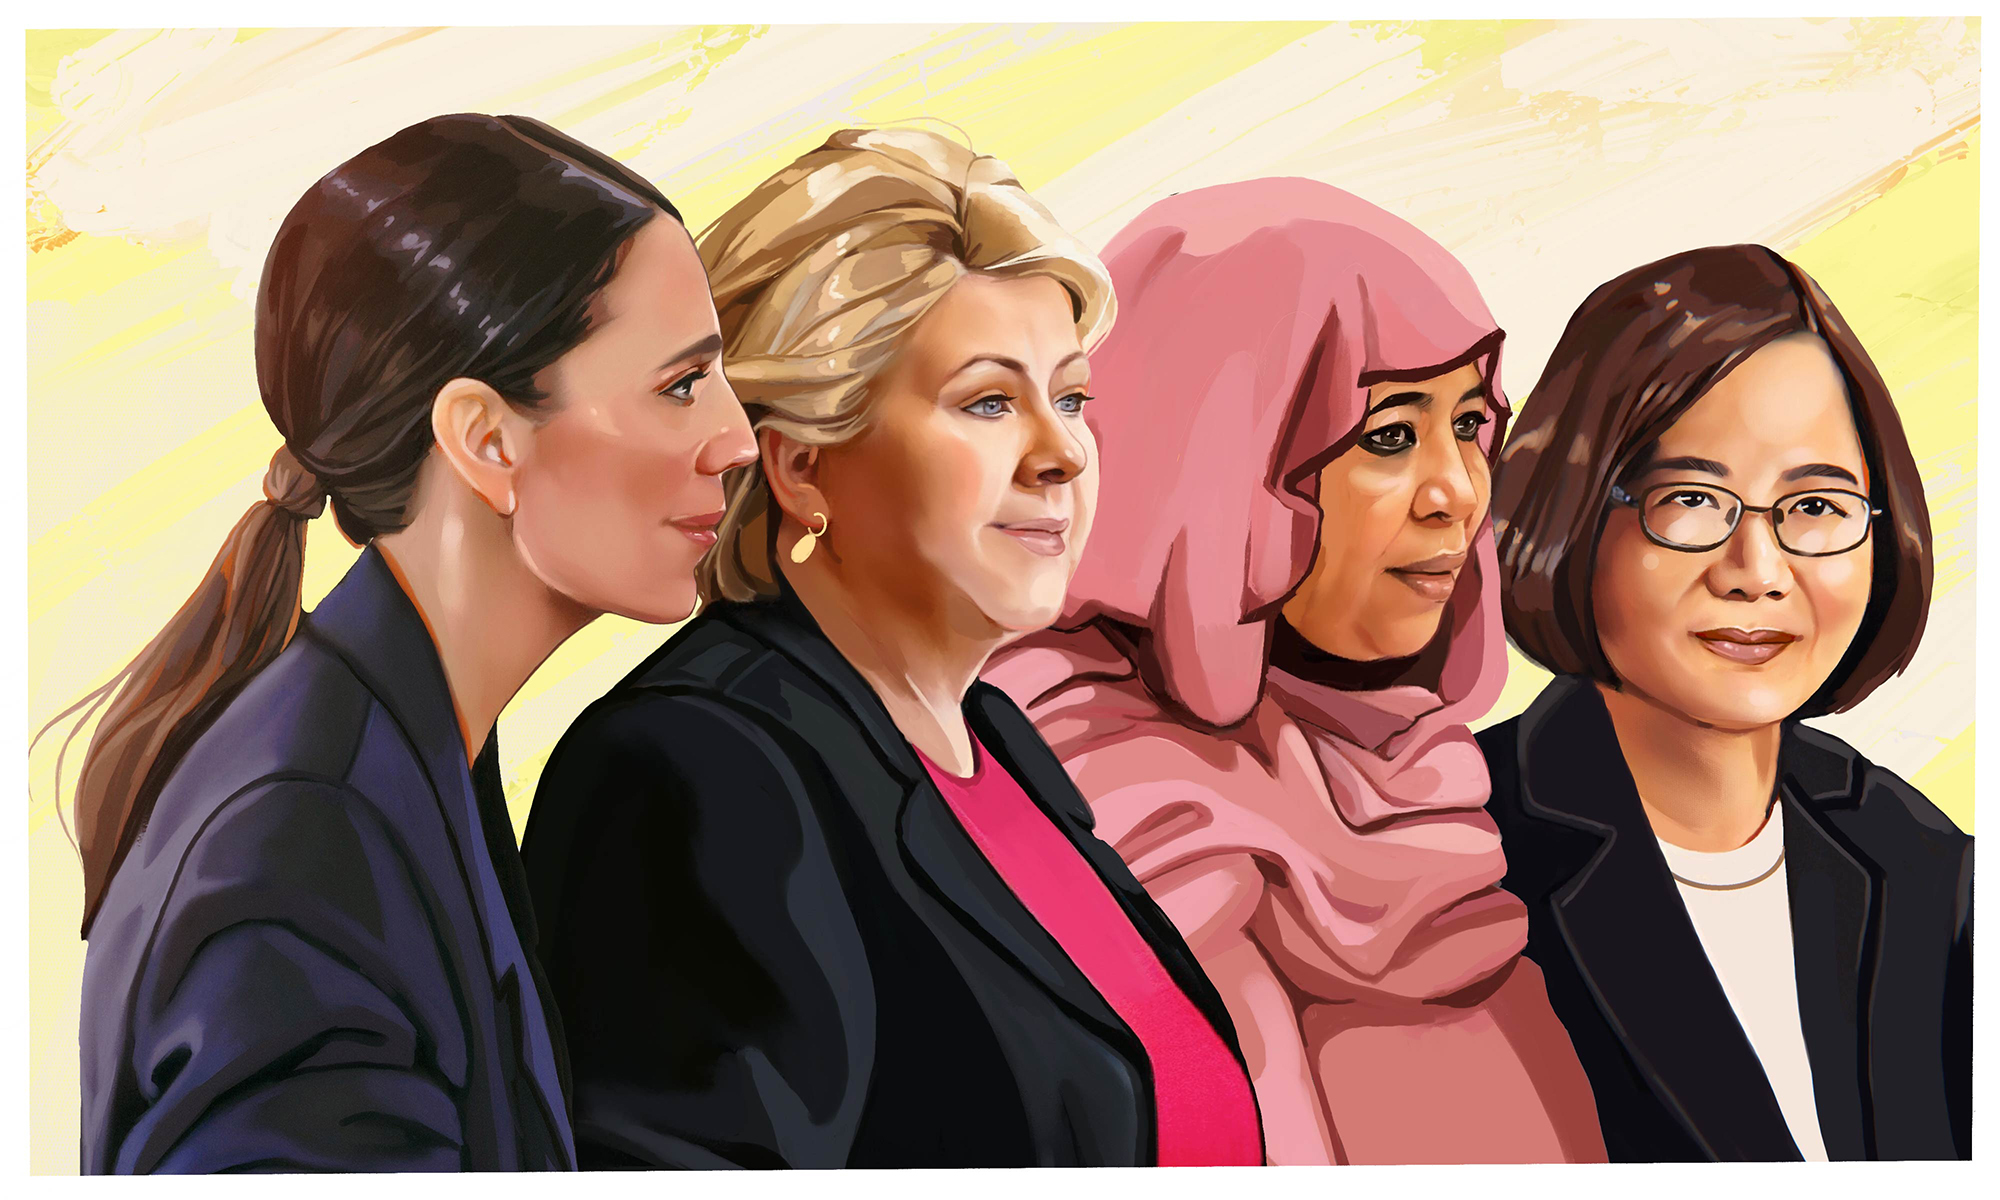 https://ideas.ted.com/wp-content/uploads/sites/3/2020/09/final_female.leaders.cover_.final_.jpg